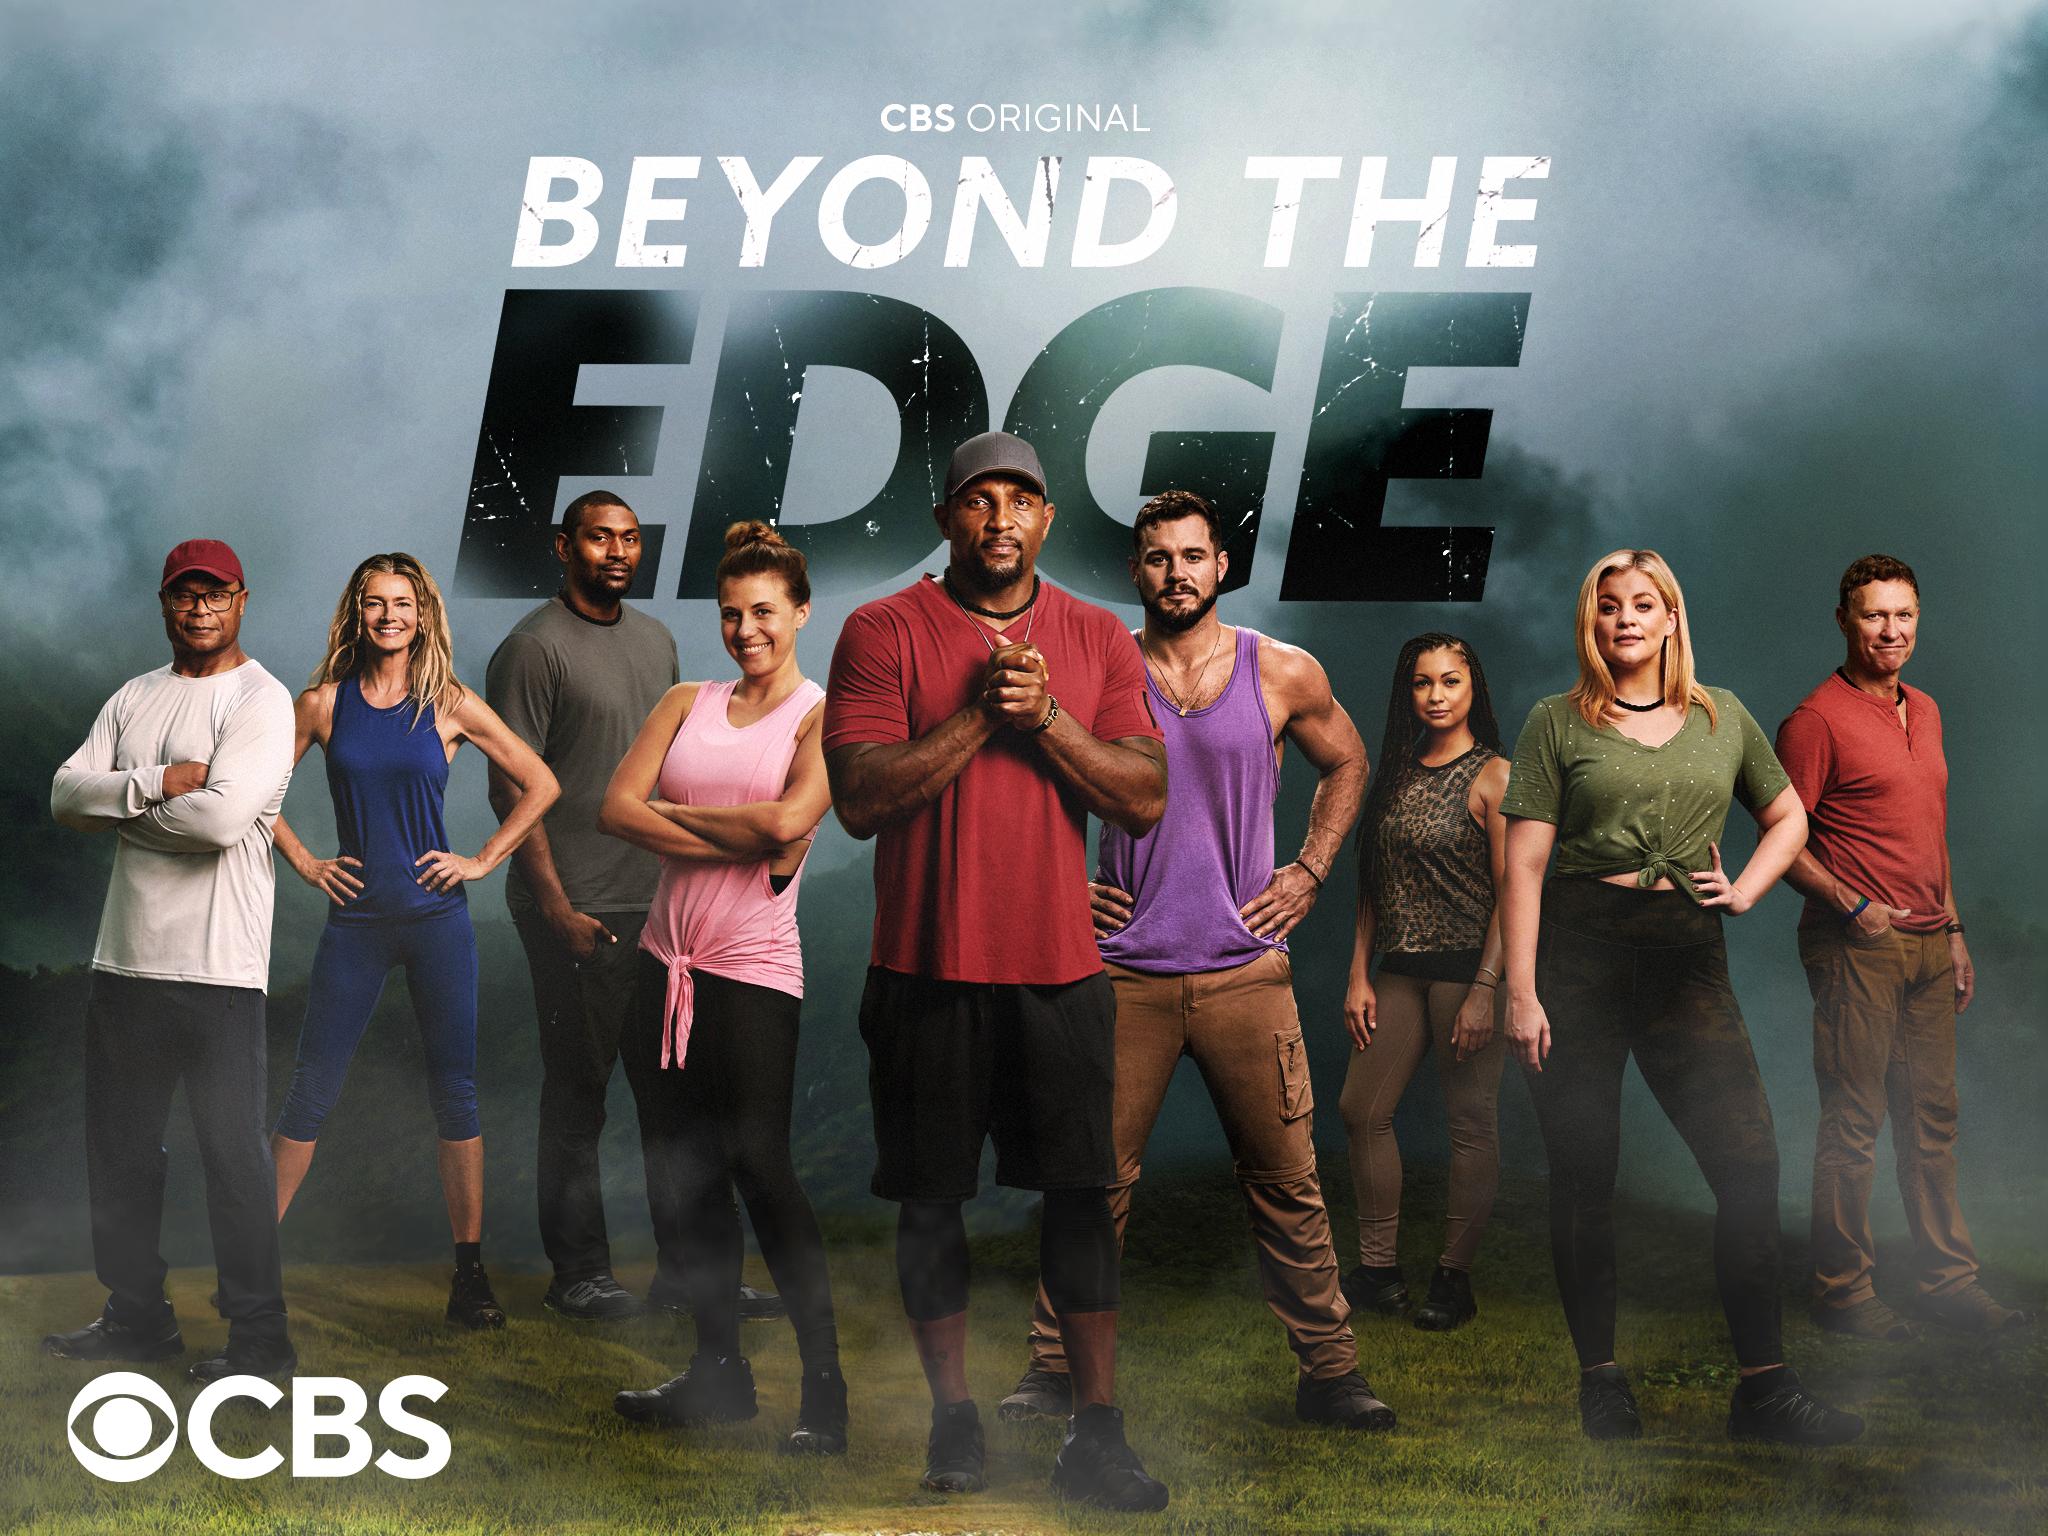 CBS Reality Show “Beyond The Edge” Features Most Difficult Celeb Survival Challenge Ever